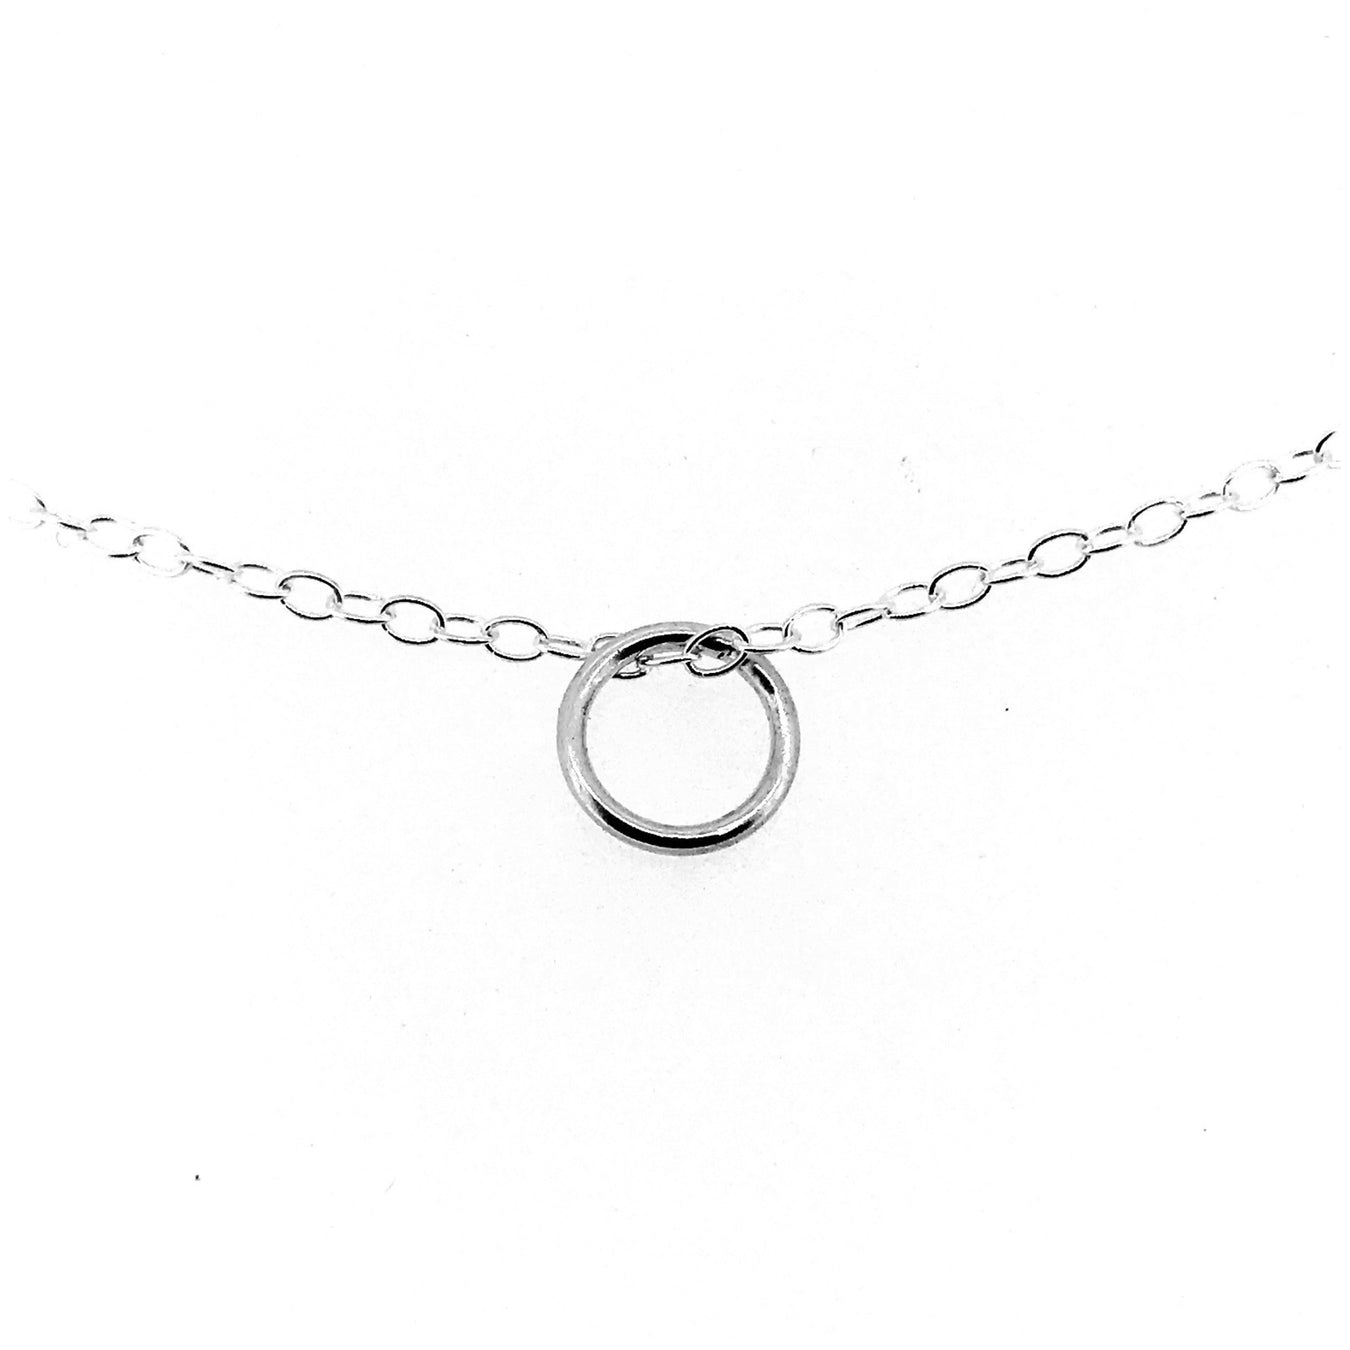 Chic, minimalist necklace in the Roberts & Co Contemporary Collection